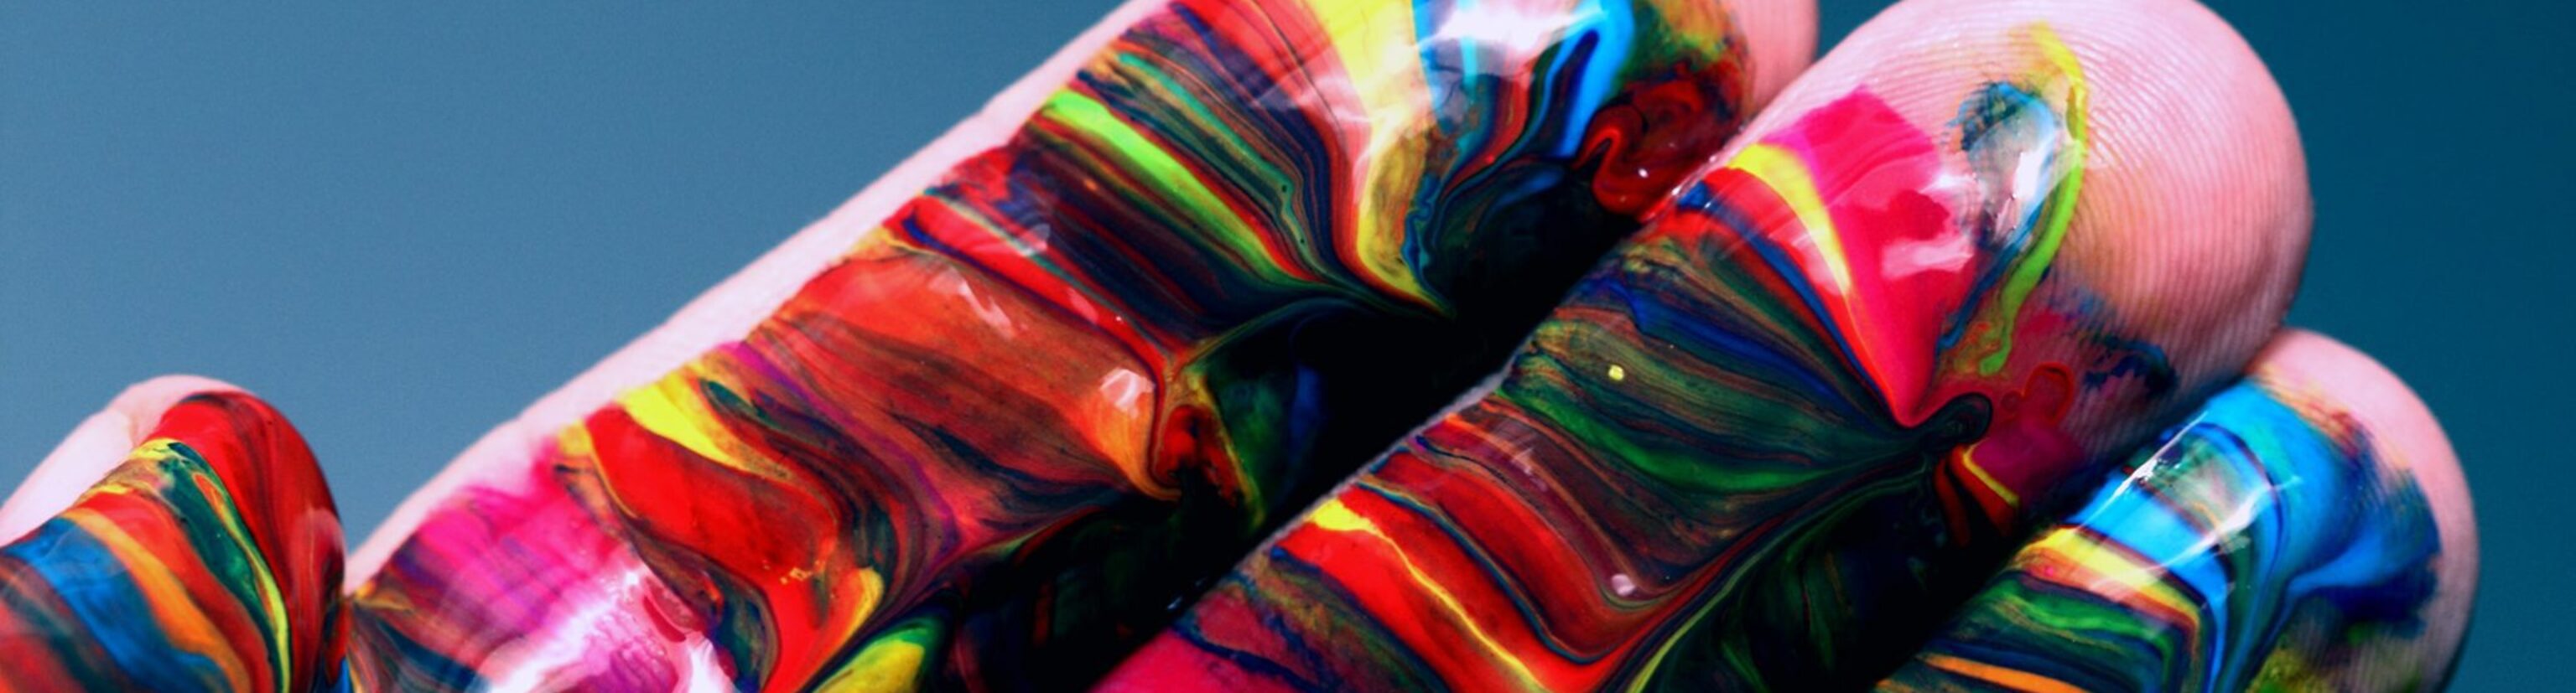 Image of a hand dipped in colorful swirls of paint, displaying both art and innovation